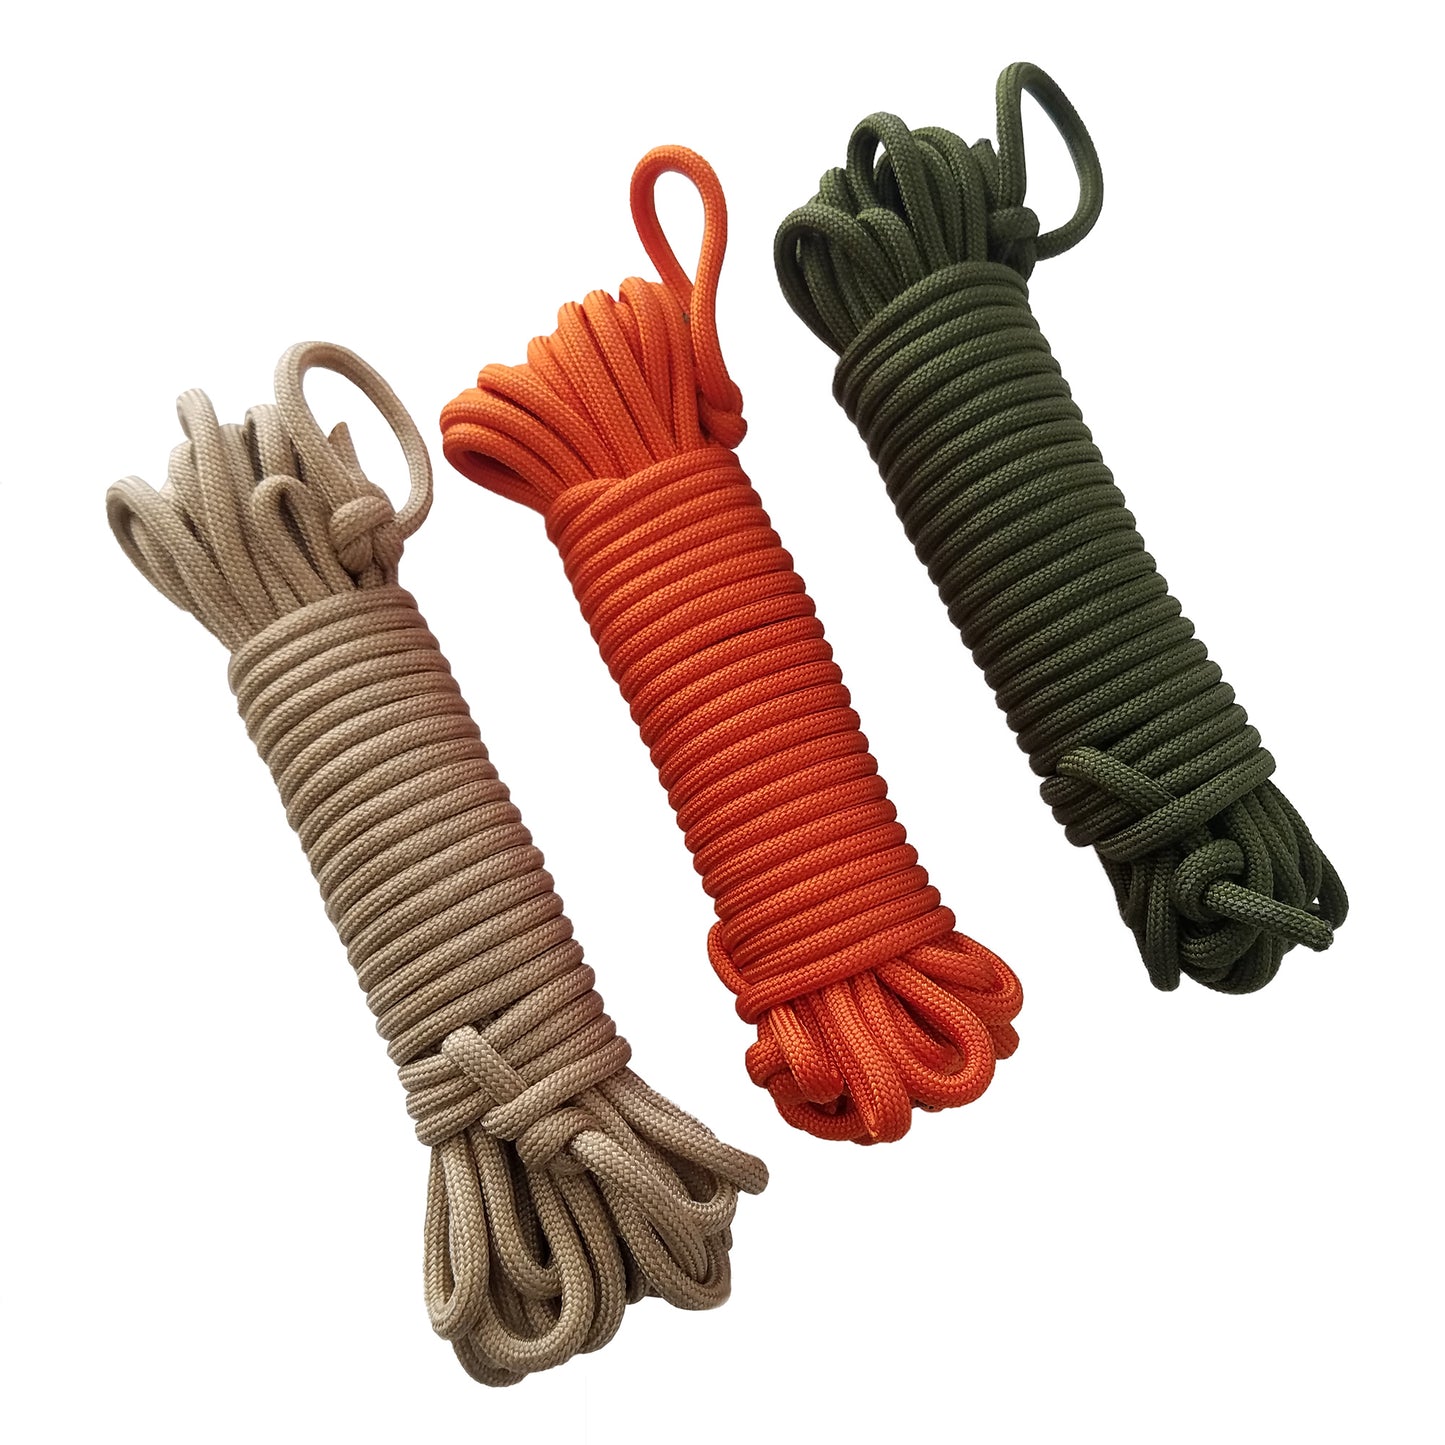 25-foot paracord for emergency